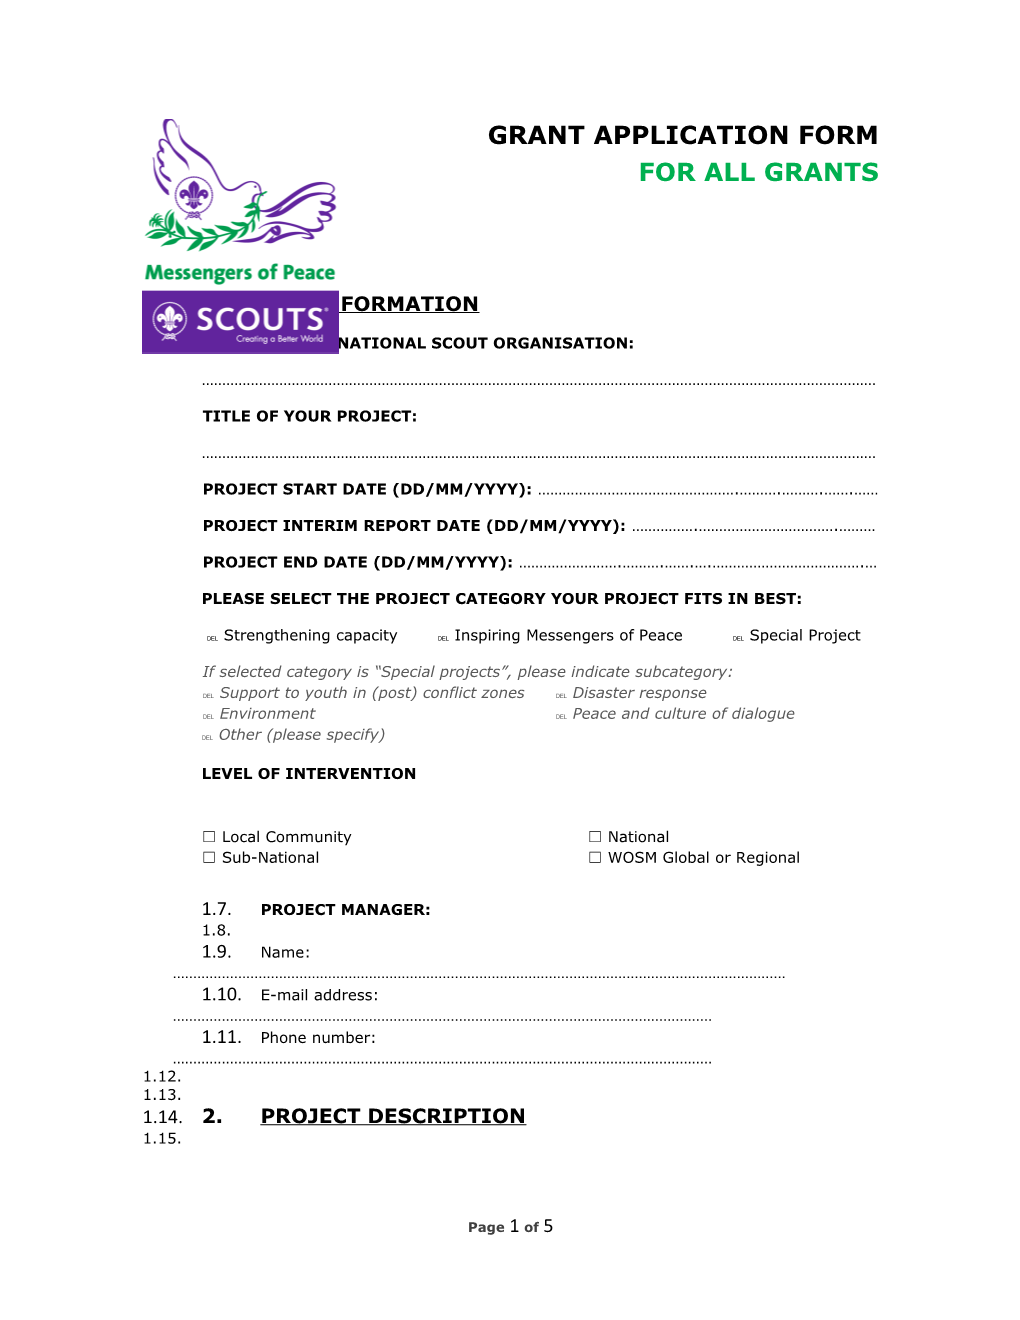 Name of Your National Scout Organisation